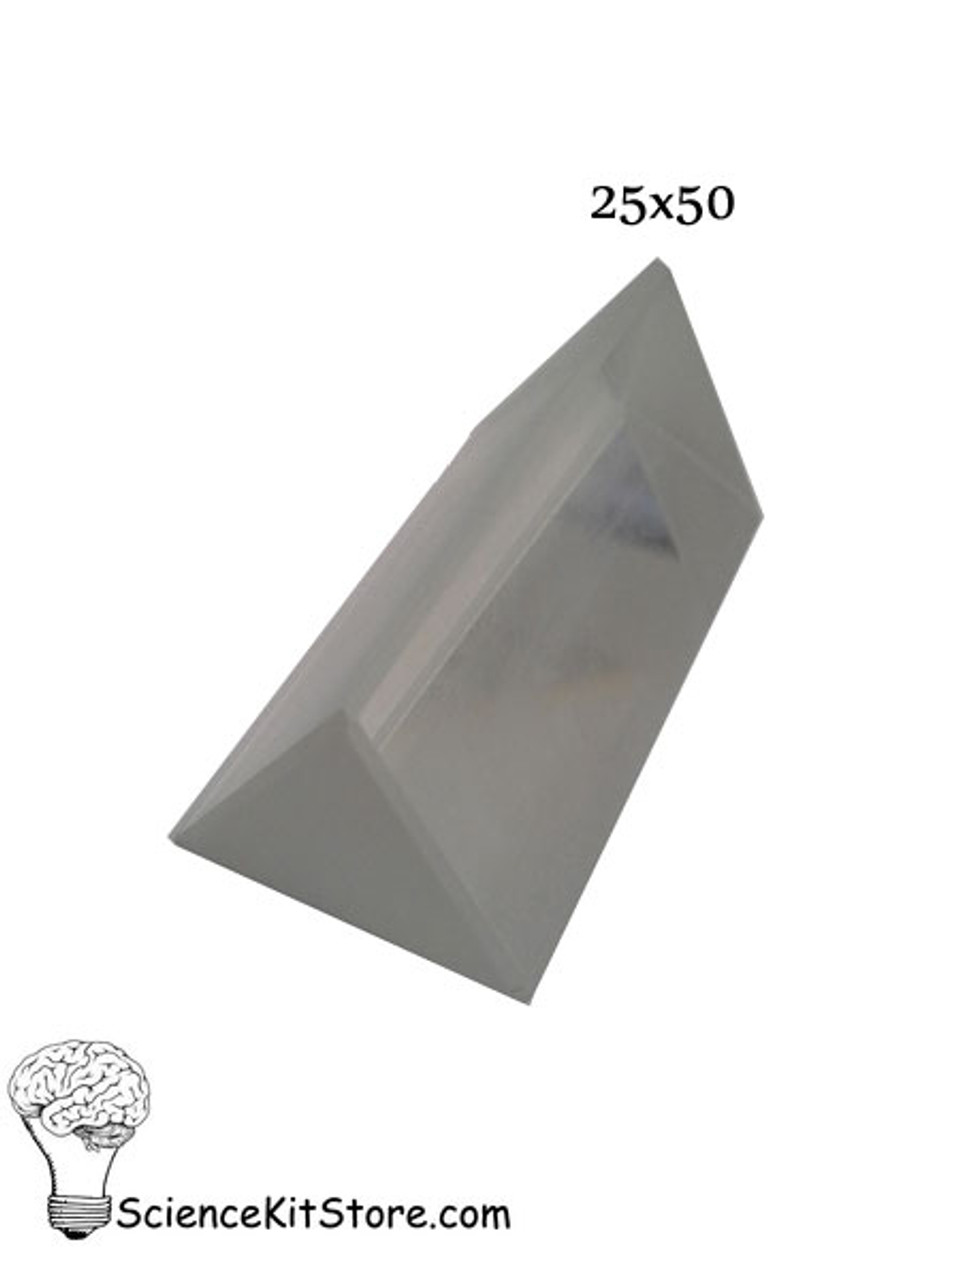 Glass Prism, Equilateral (Length 50 mm, Face 25mm)